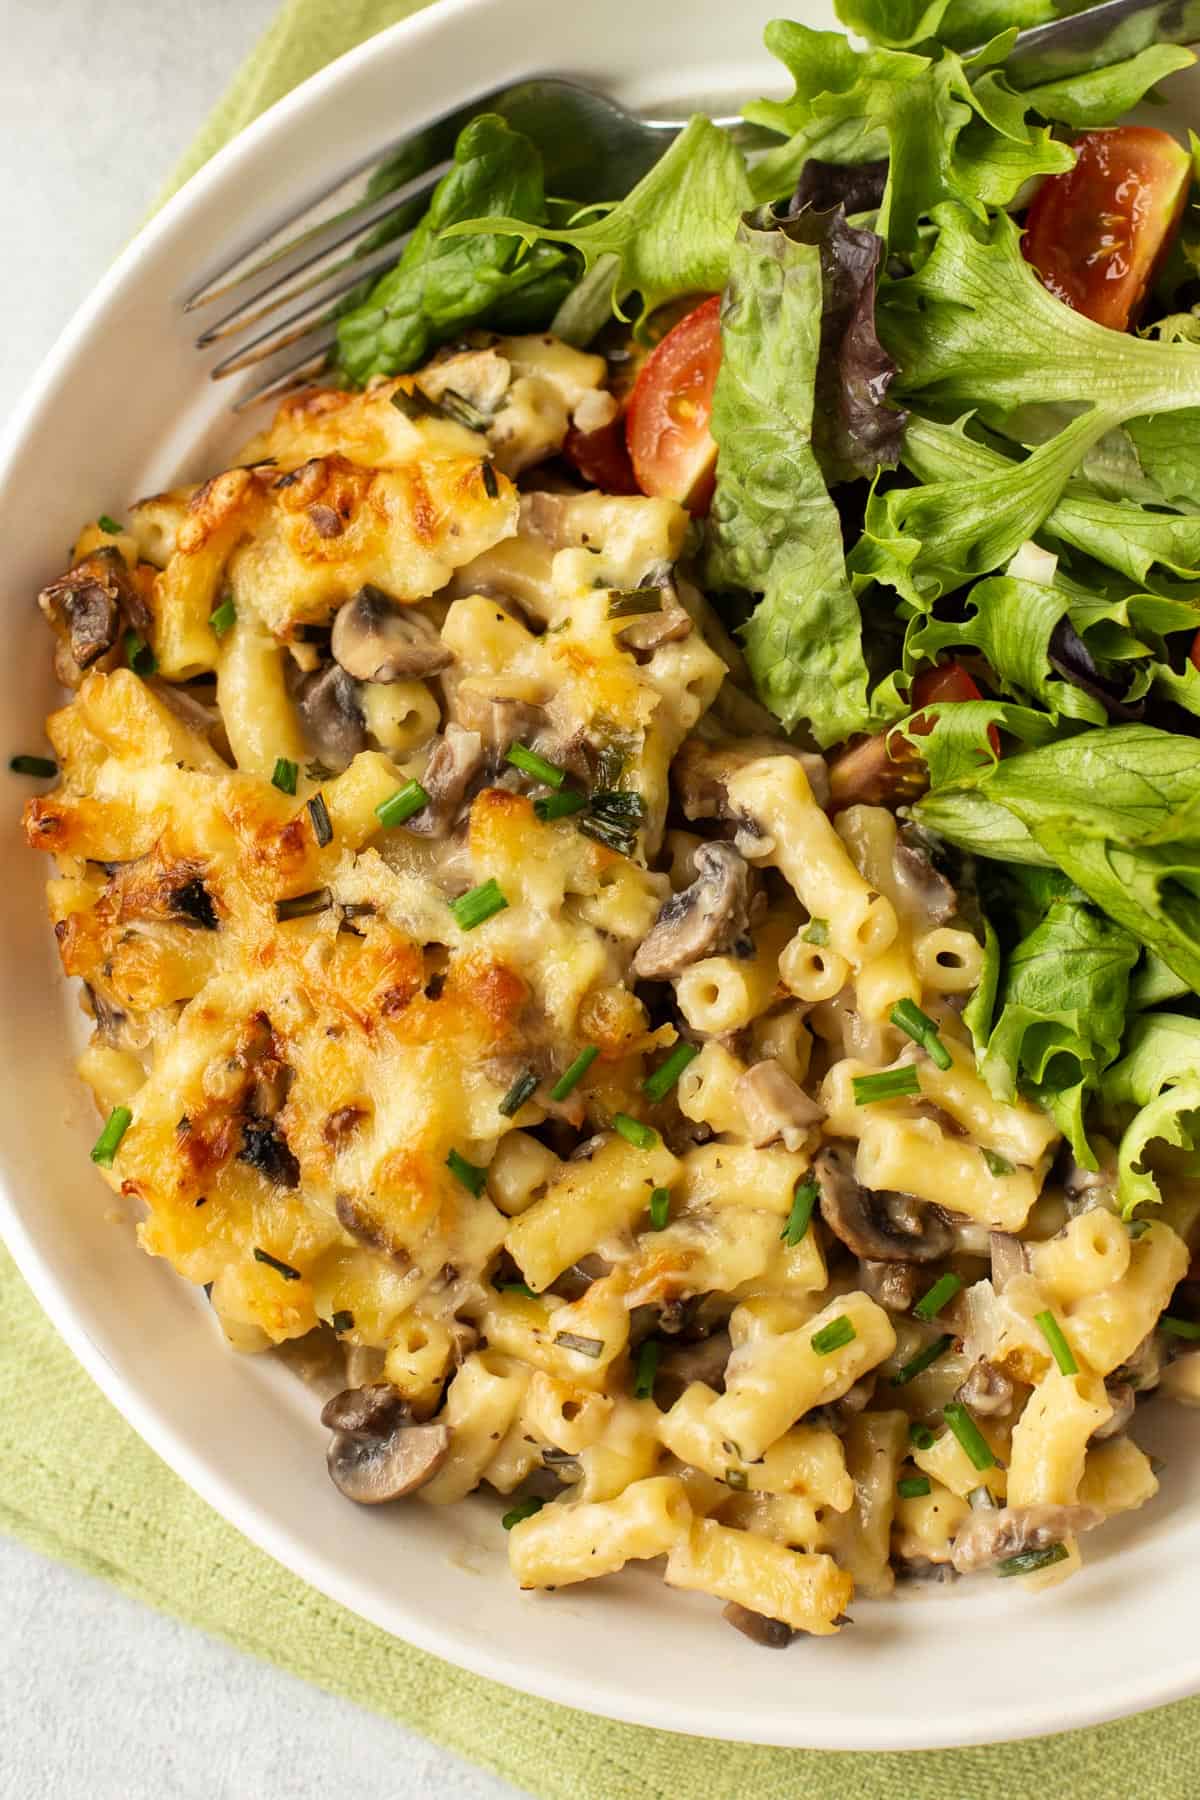 A portion of garlic mushroom mac and cheese in a bowl with salad.